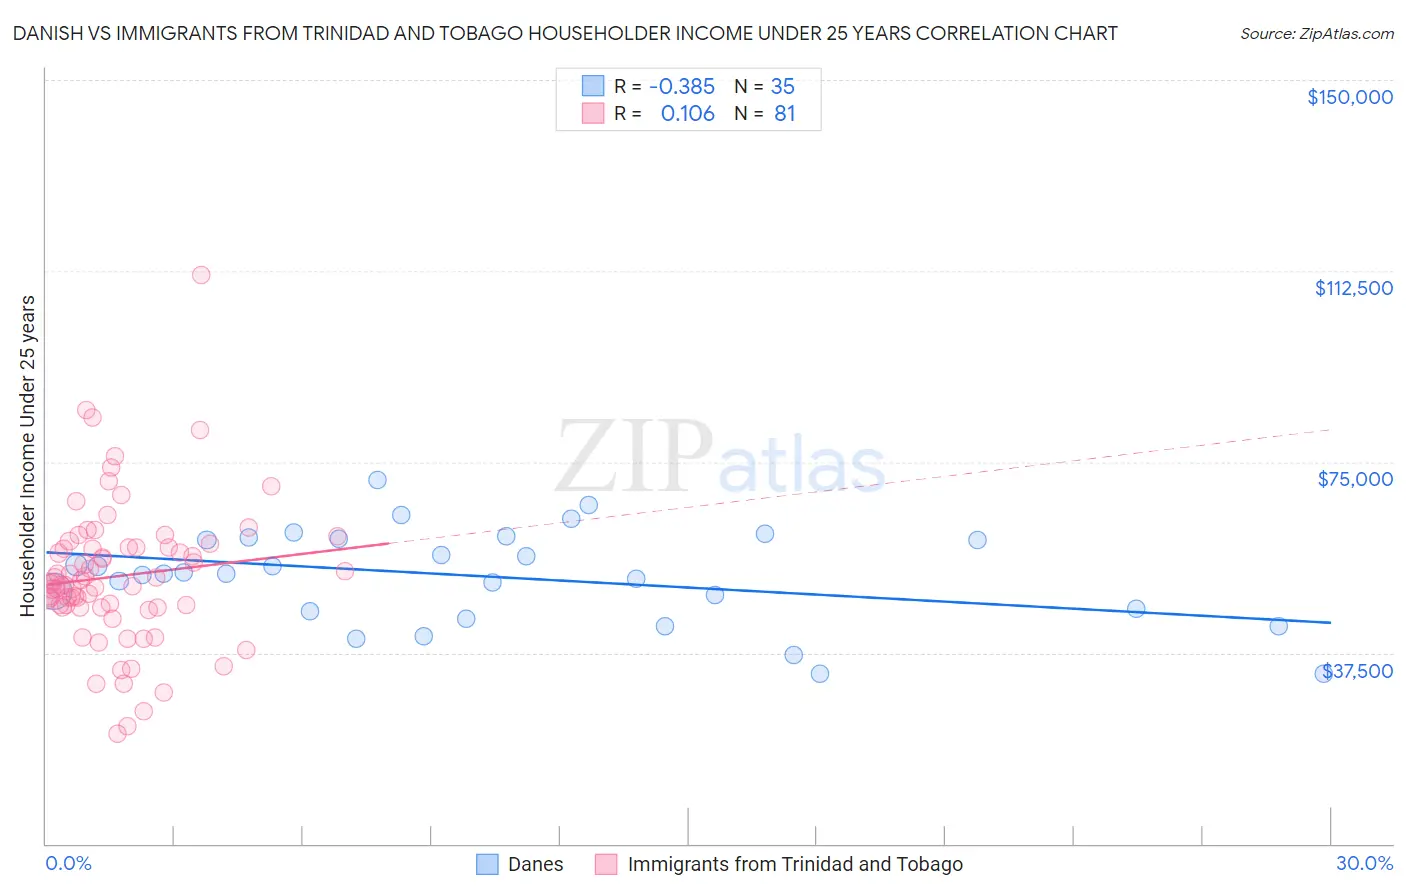 Danish vs Immigrants from Trinidad and Tobago Householder Income Under 25 years